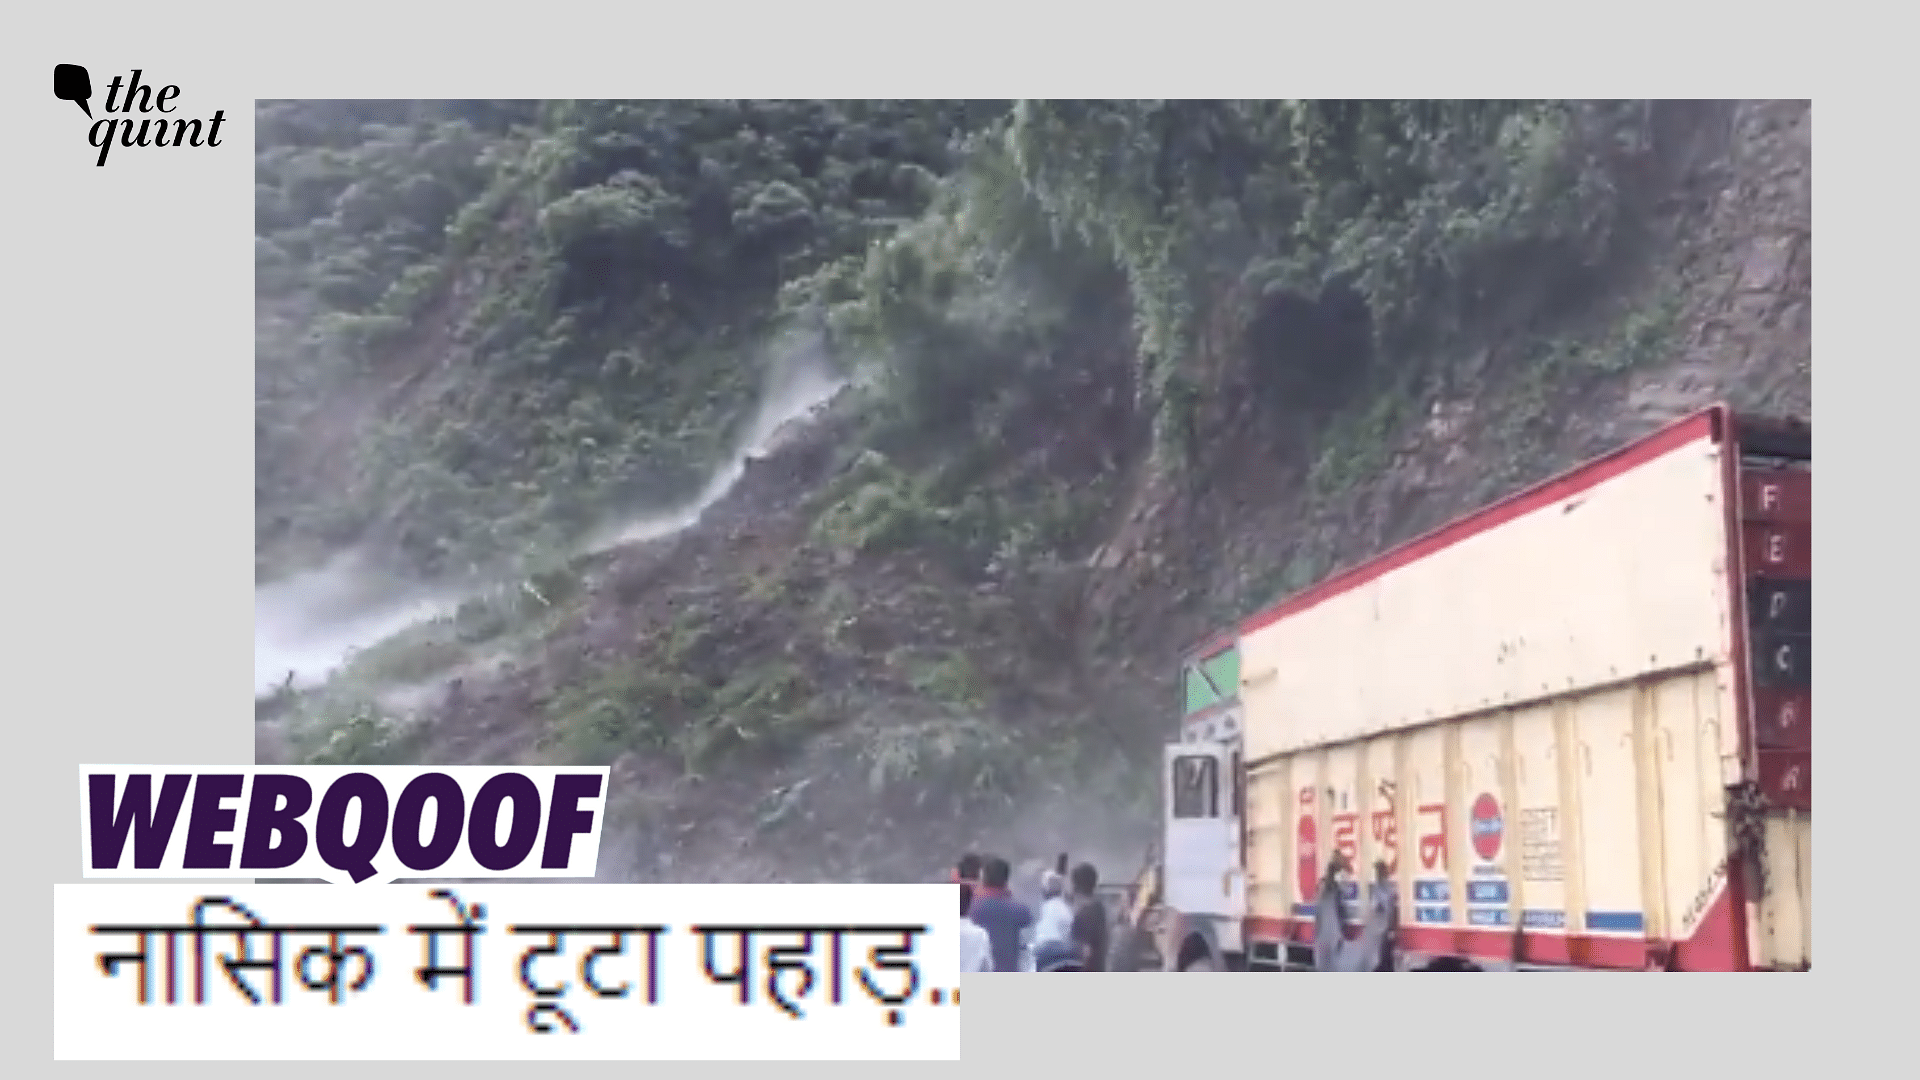 <div class="paragraphs"><p>Fact-check : The claim states that the video shows landslide from Nashik.</p></div>